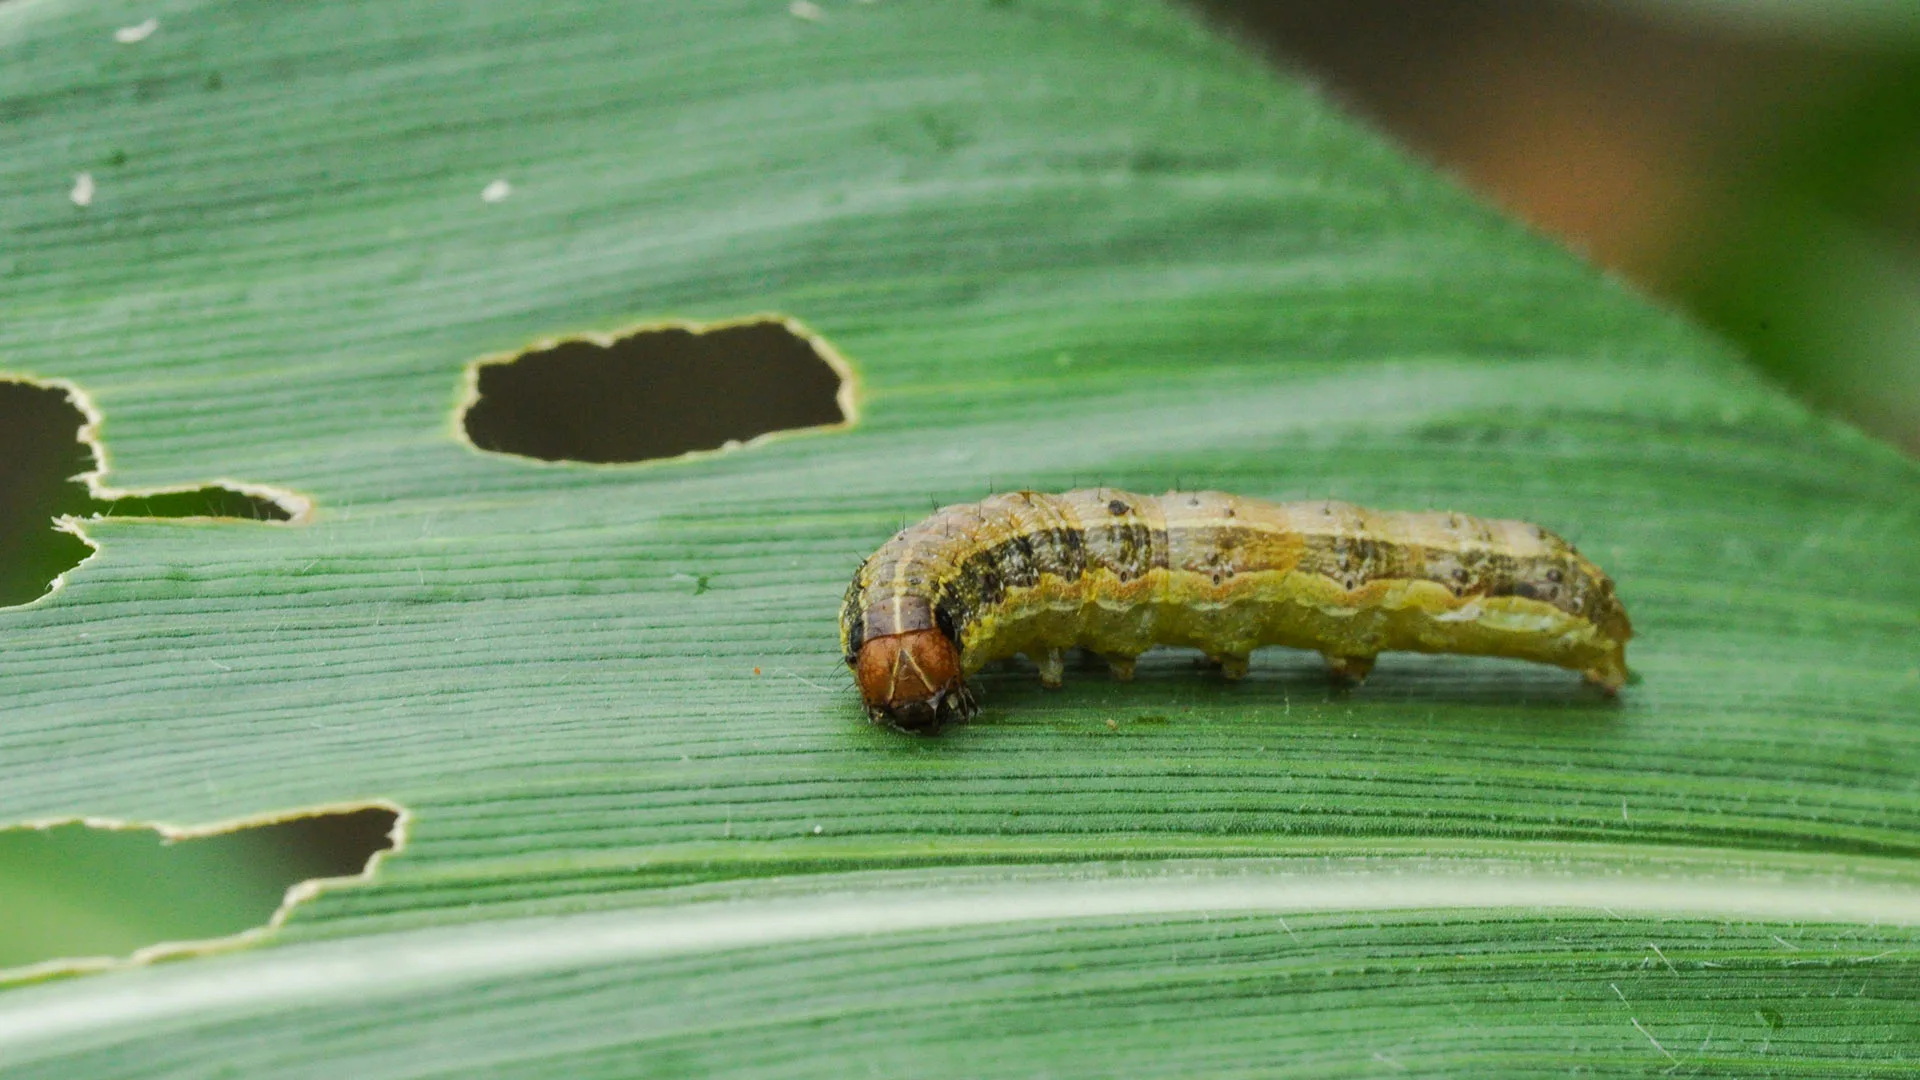 An armyworm eating a leaf and causing issues near Indianapolis, IN.